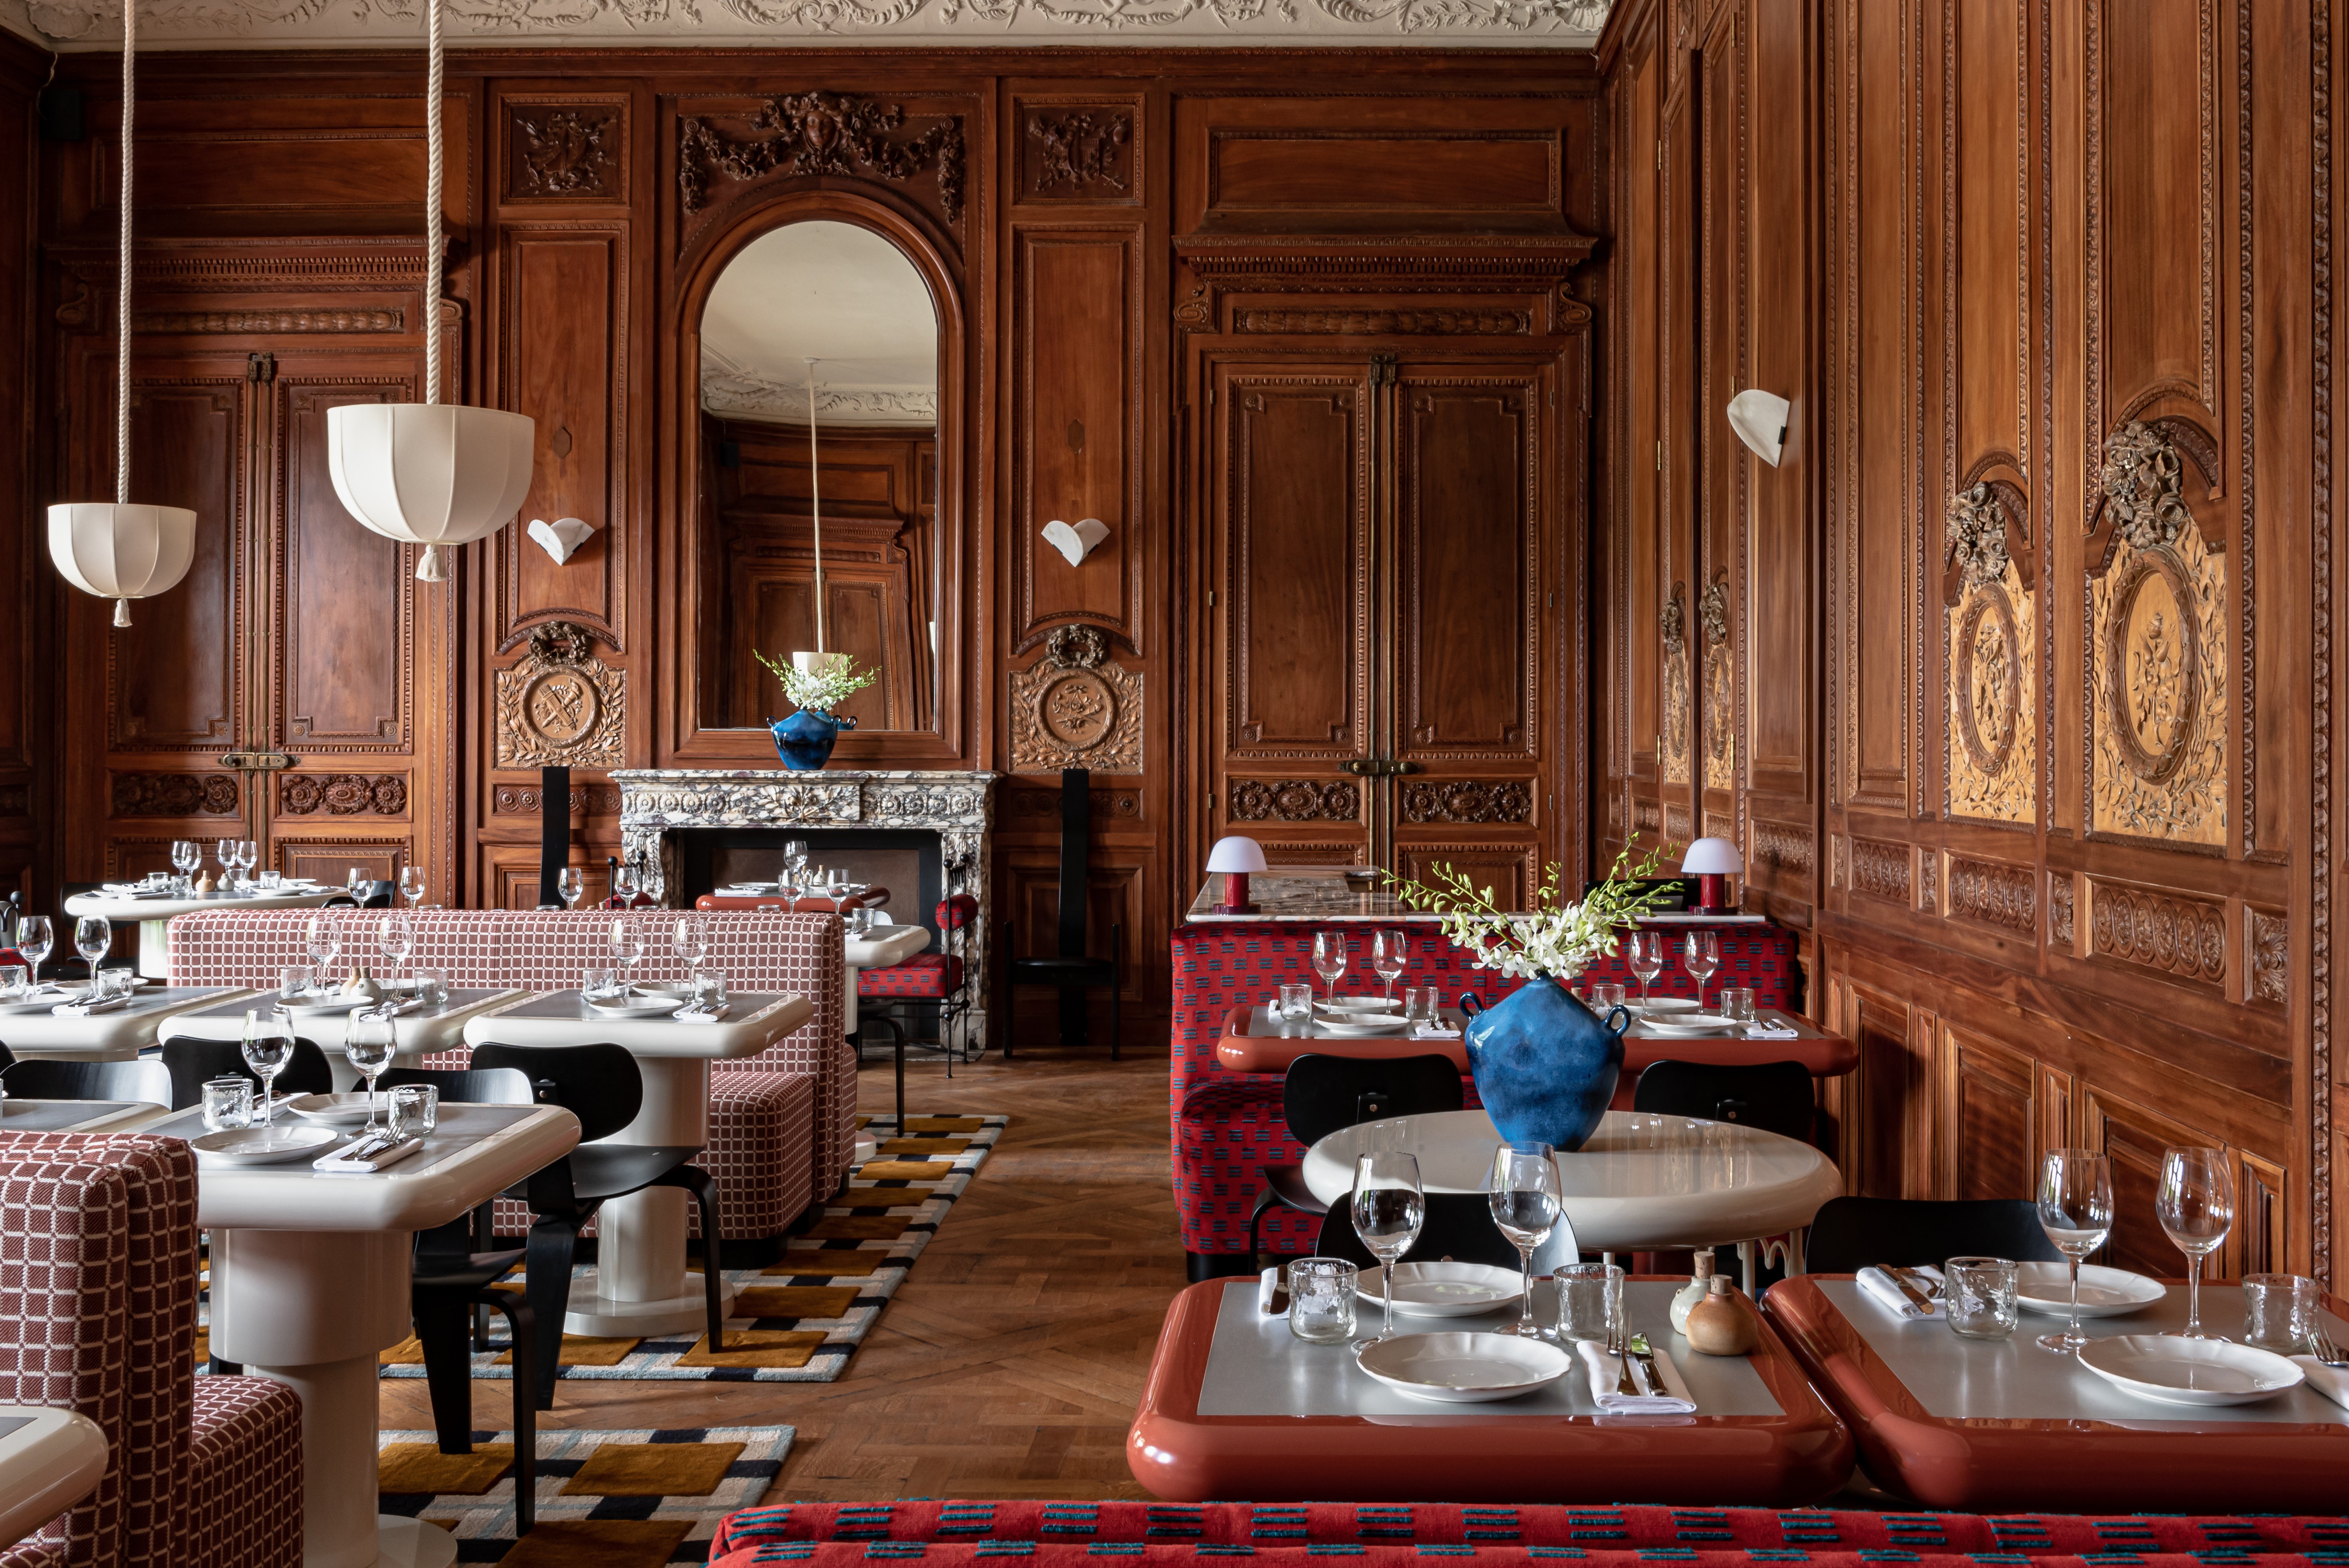 Jackson Boxer’s menu blesses the grand wood-panelled restaurant with plates of courgette slivers and elderflower champagne